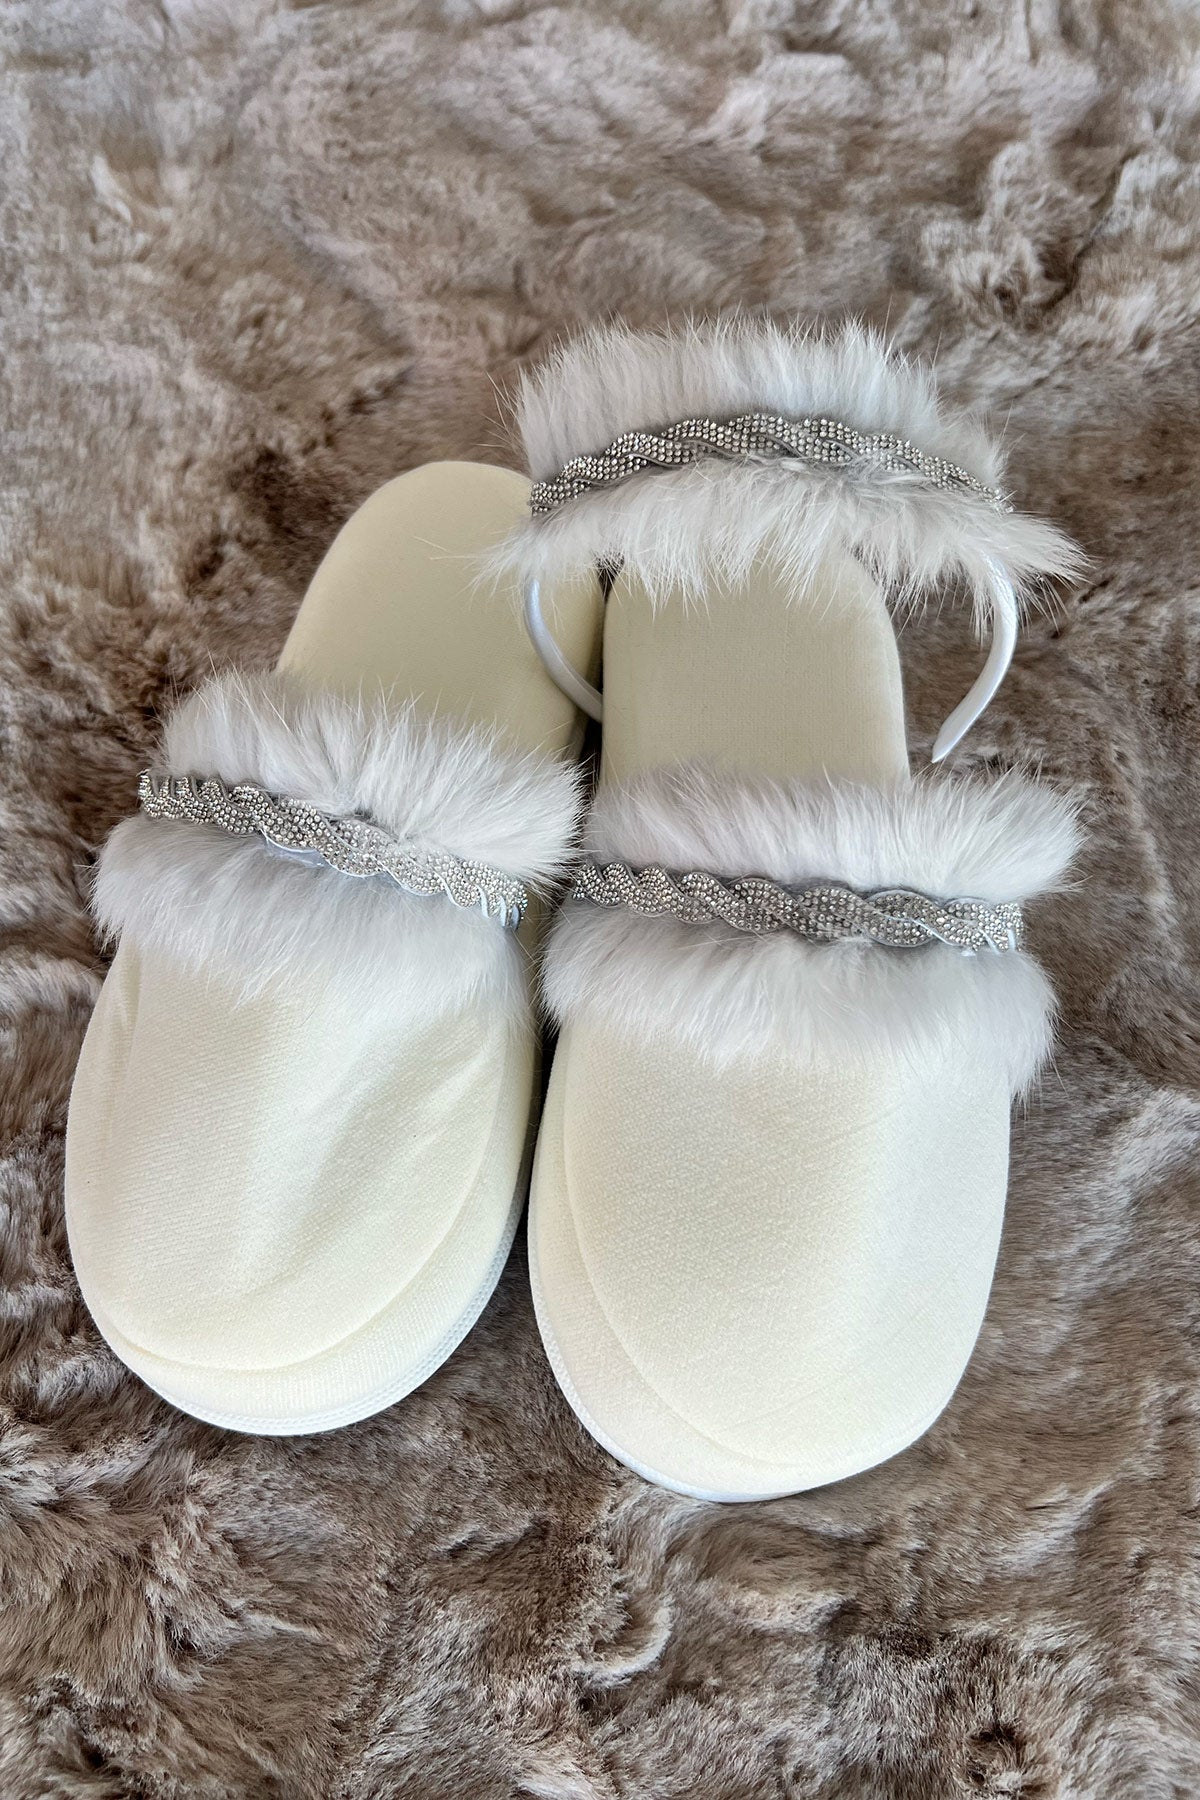 Shopymommy 757108 Feather Themed Maternity Crown & Maternity Slippers Set Grey